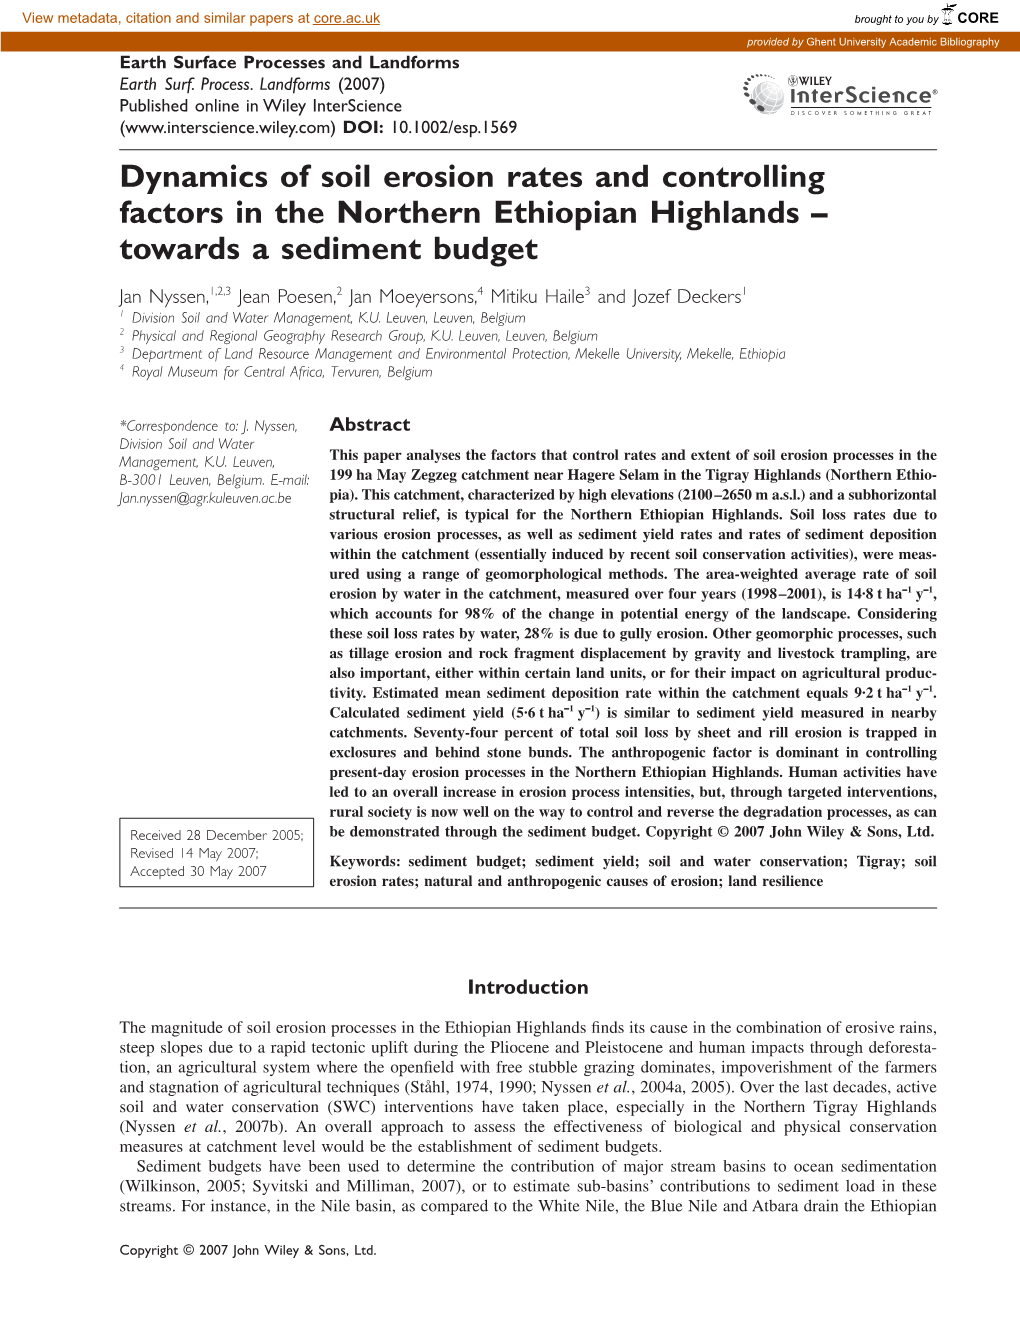 Dynamics of Soil Erosion Rates and Controlling Factors in the Northern Ethiopian Highlands – Towards a Sediment Budget